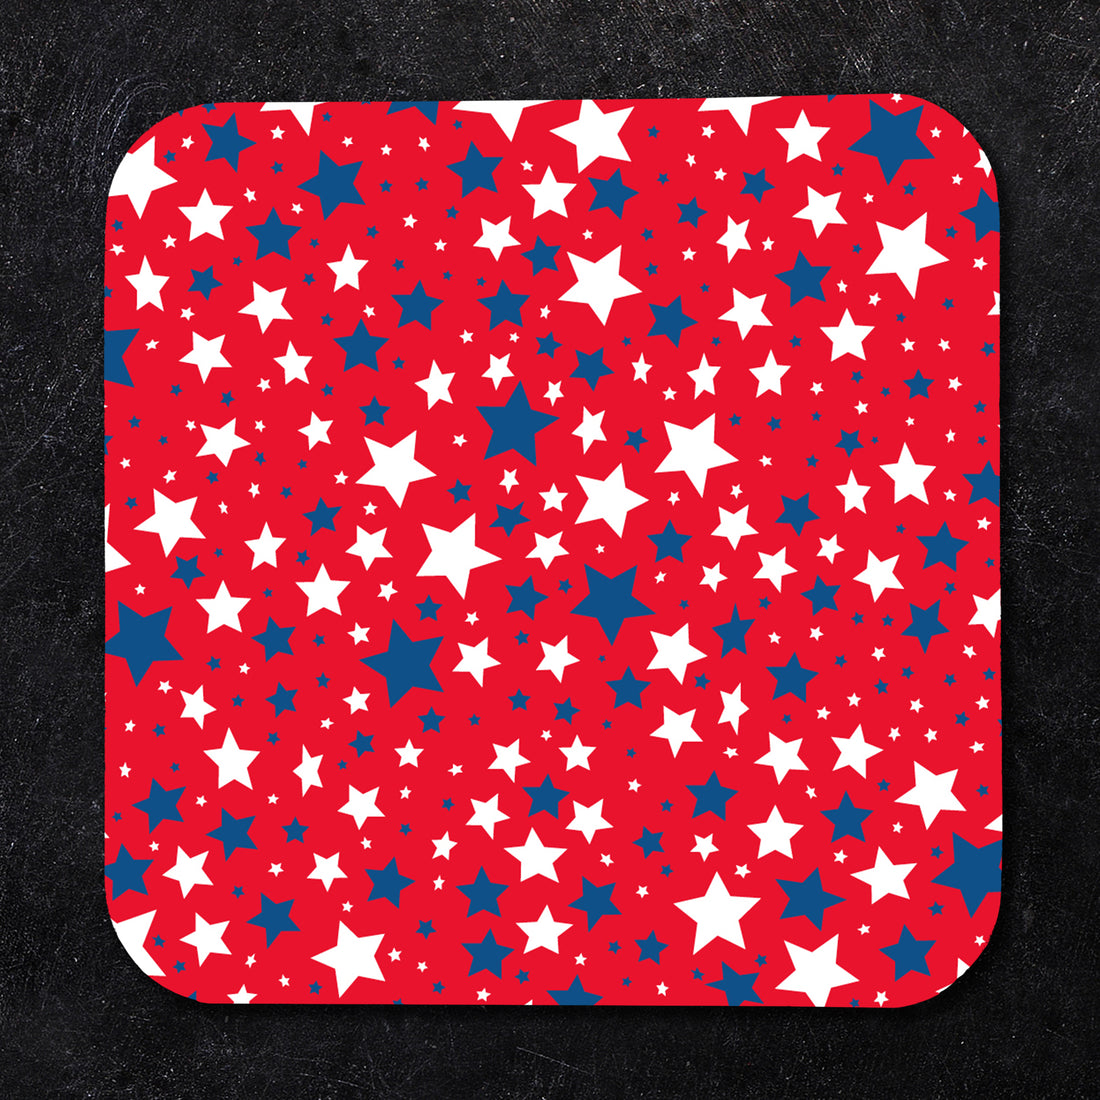 Coaster: Holiday, Red White and Blue Stars - Pack of 6